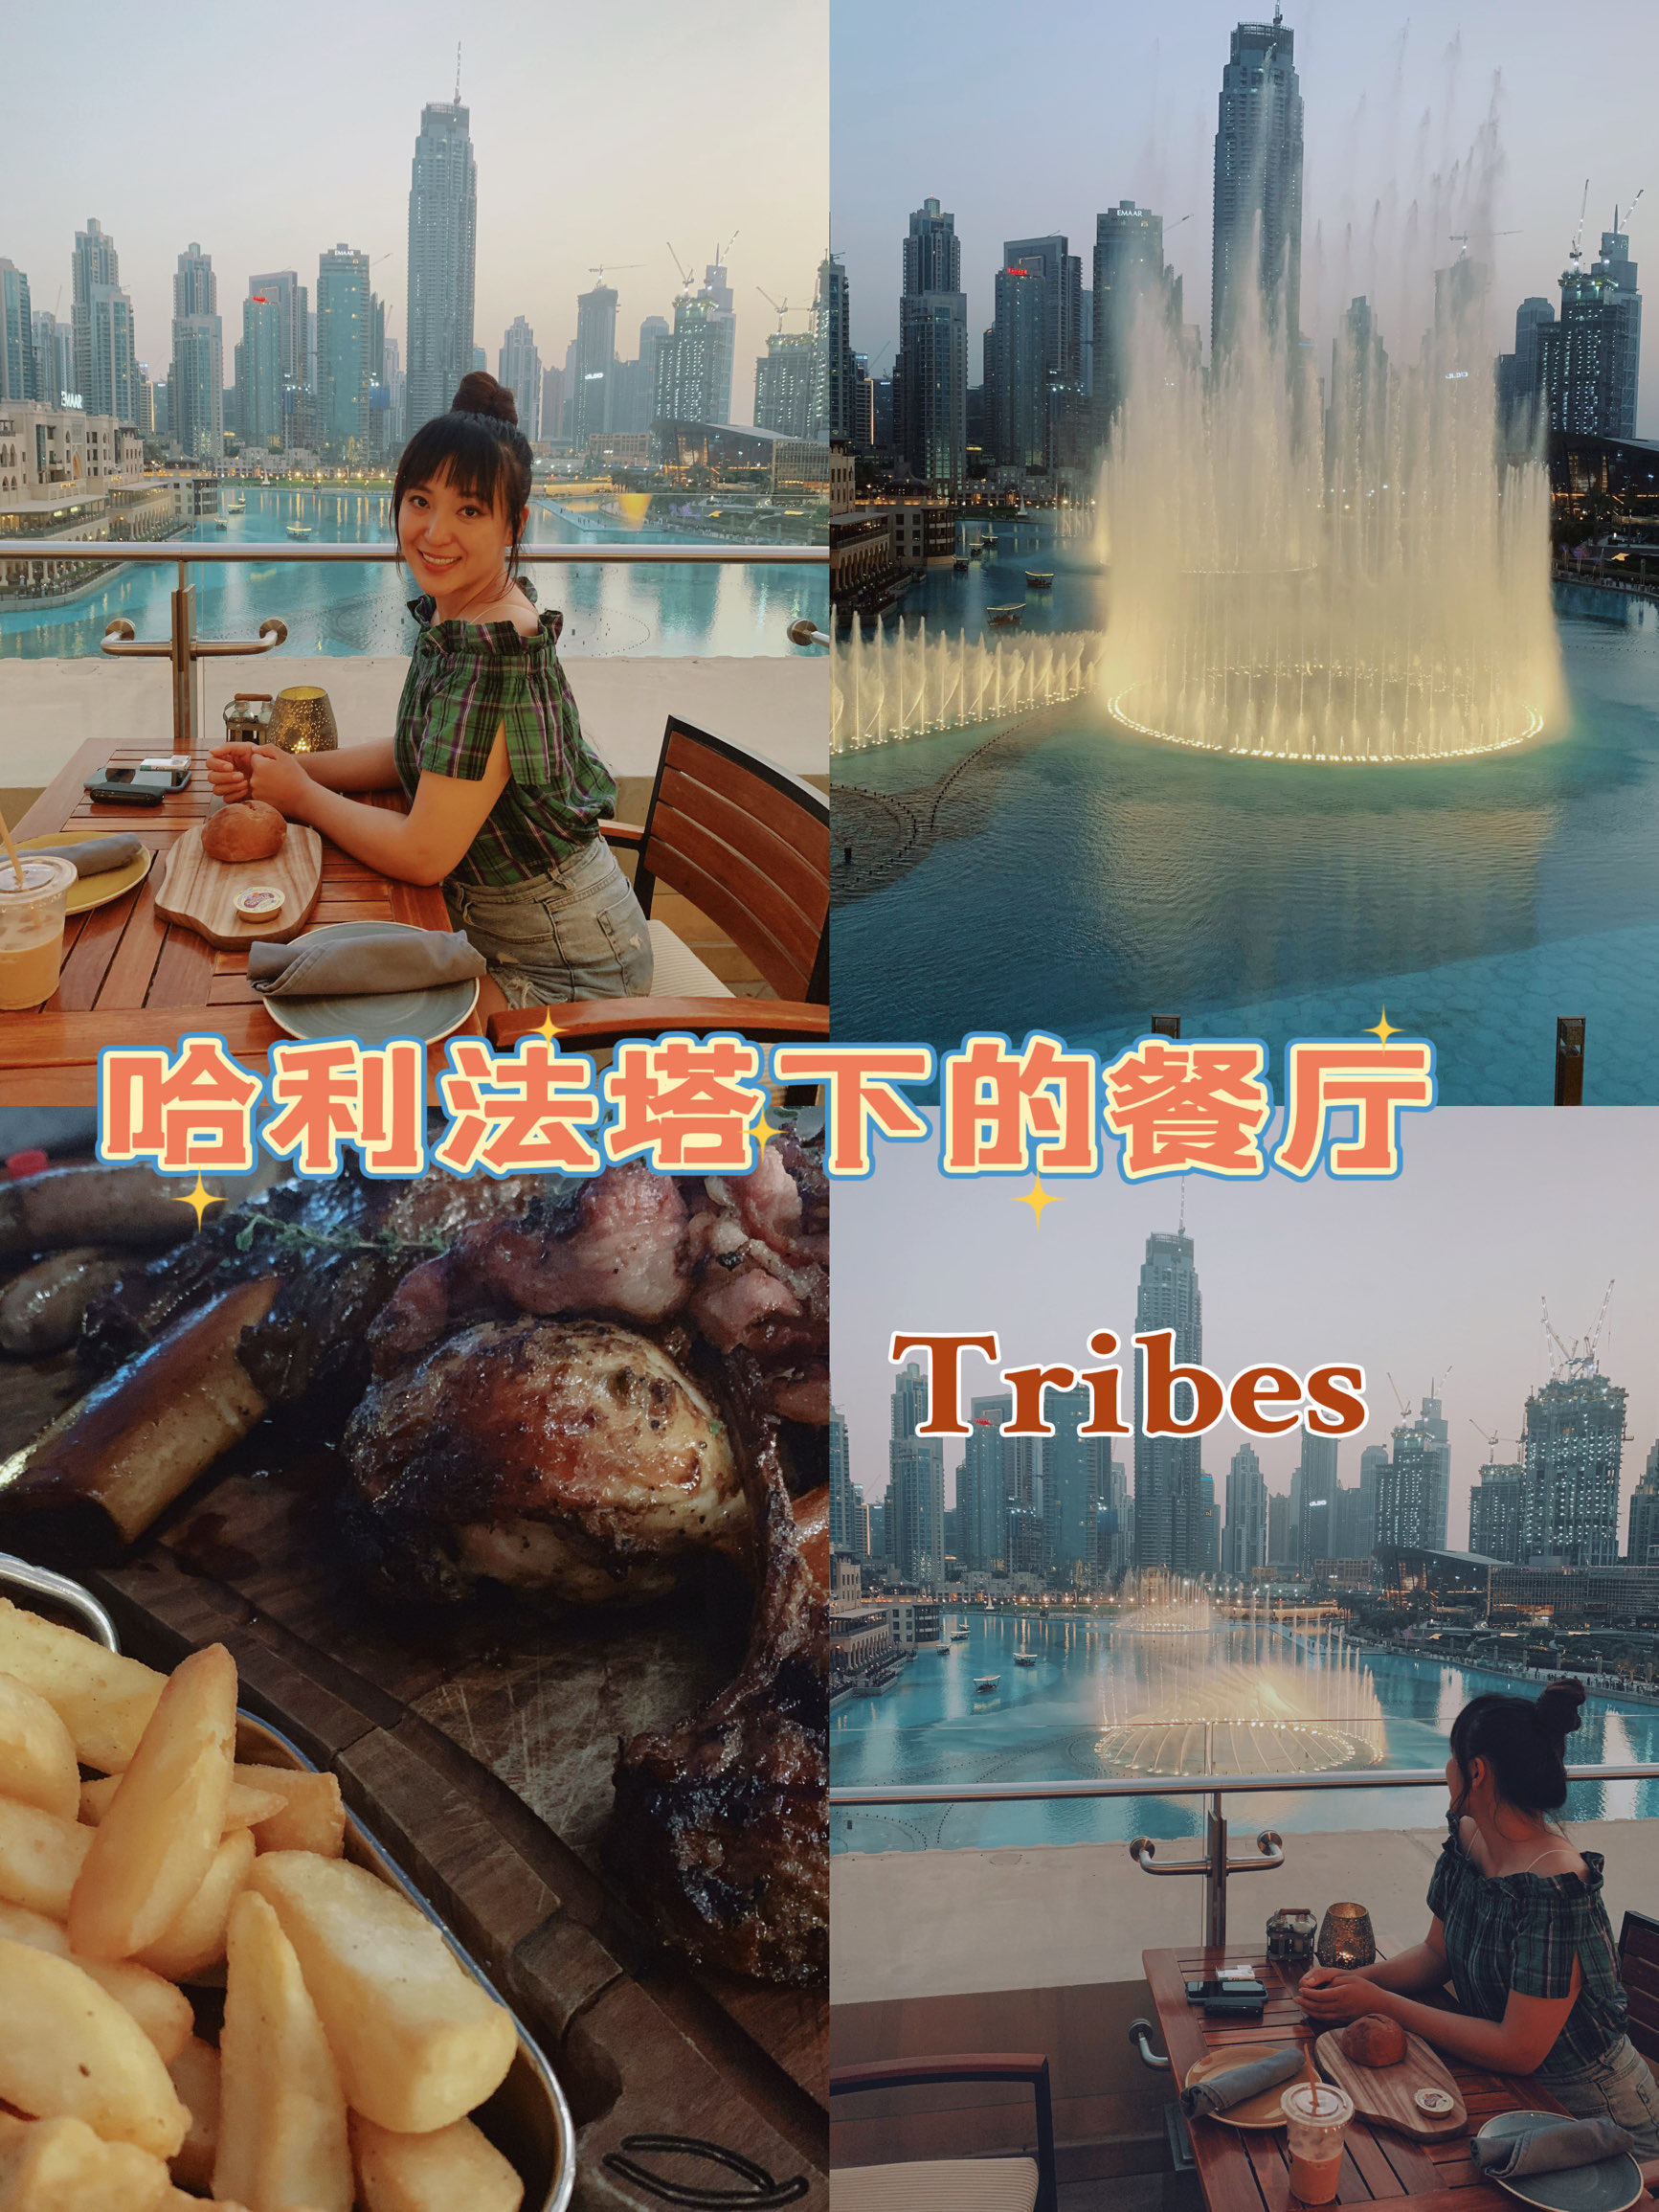 Tribes(The Mall of the Emirate... / 2nd floor, next to Vox Cinema Mall of The Emirates, Dubai, UAE